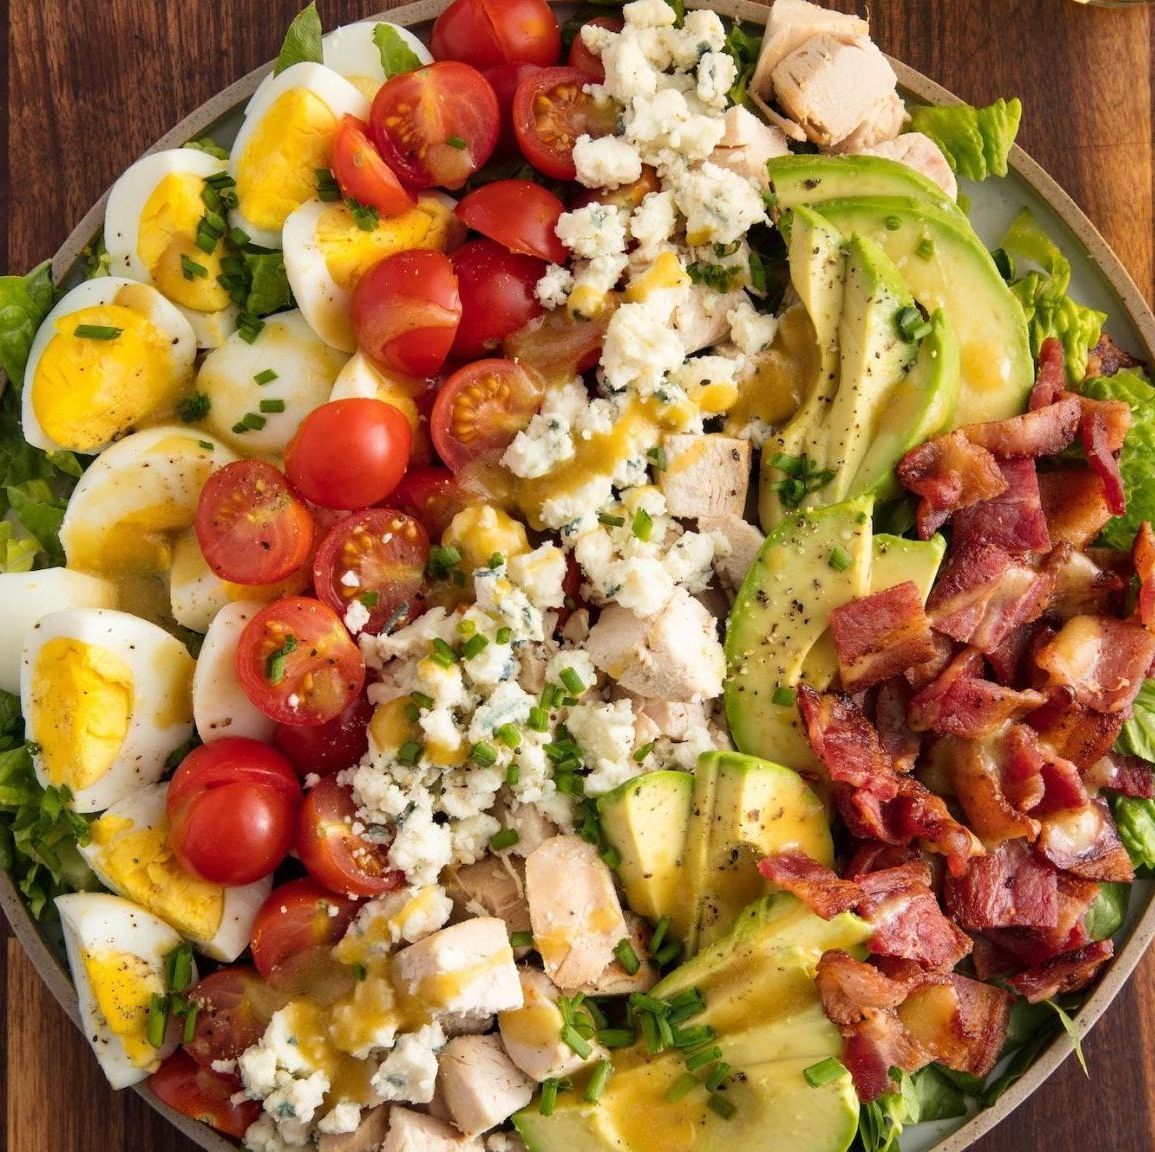 preview for How To Make The Best-Ever Cobb Salad